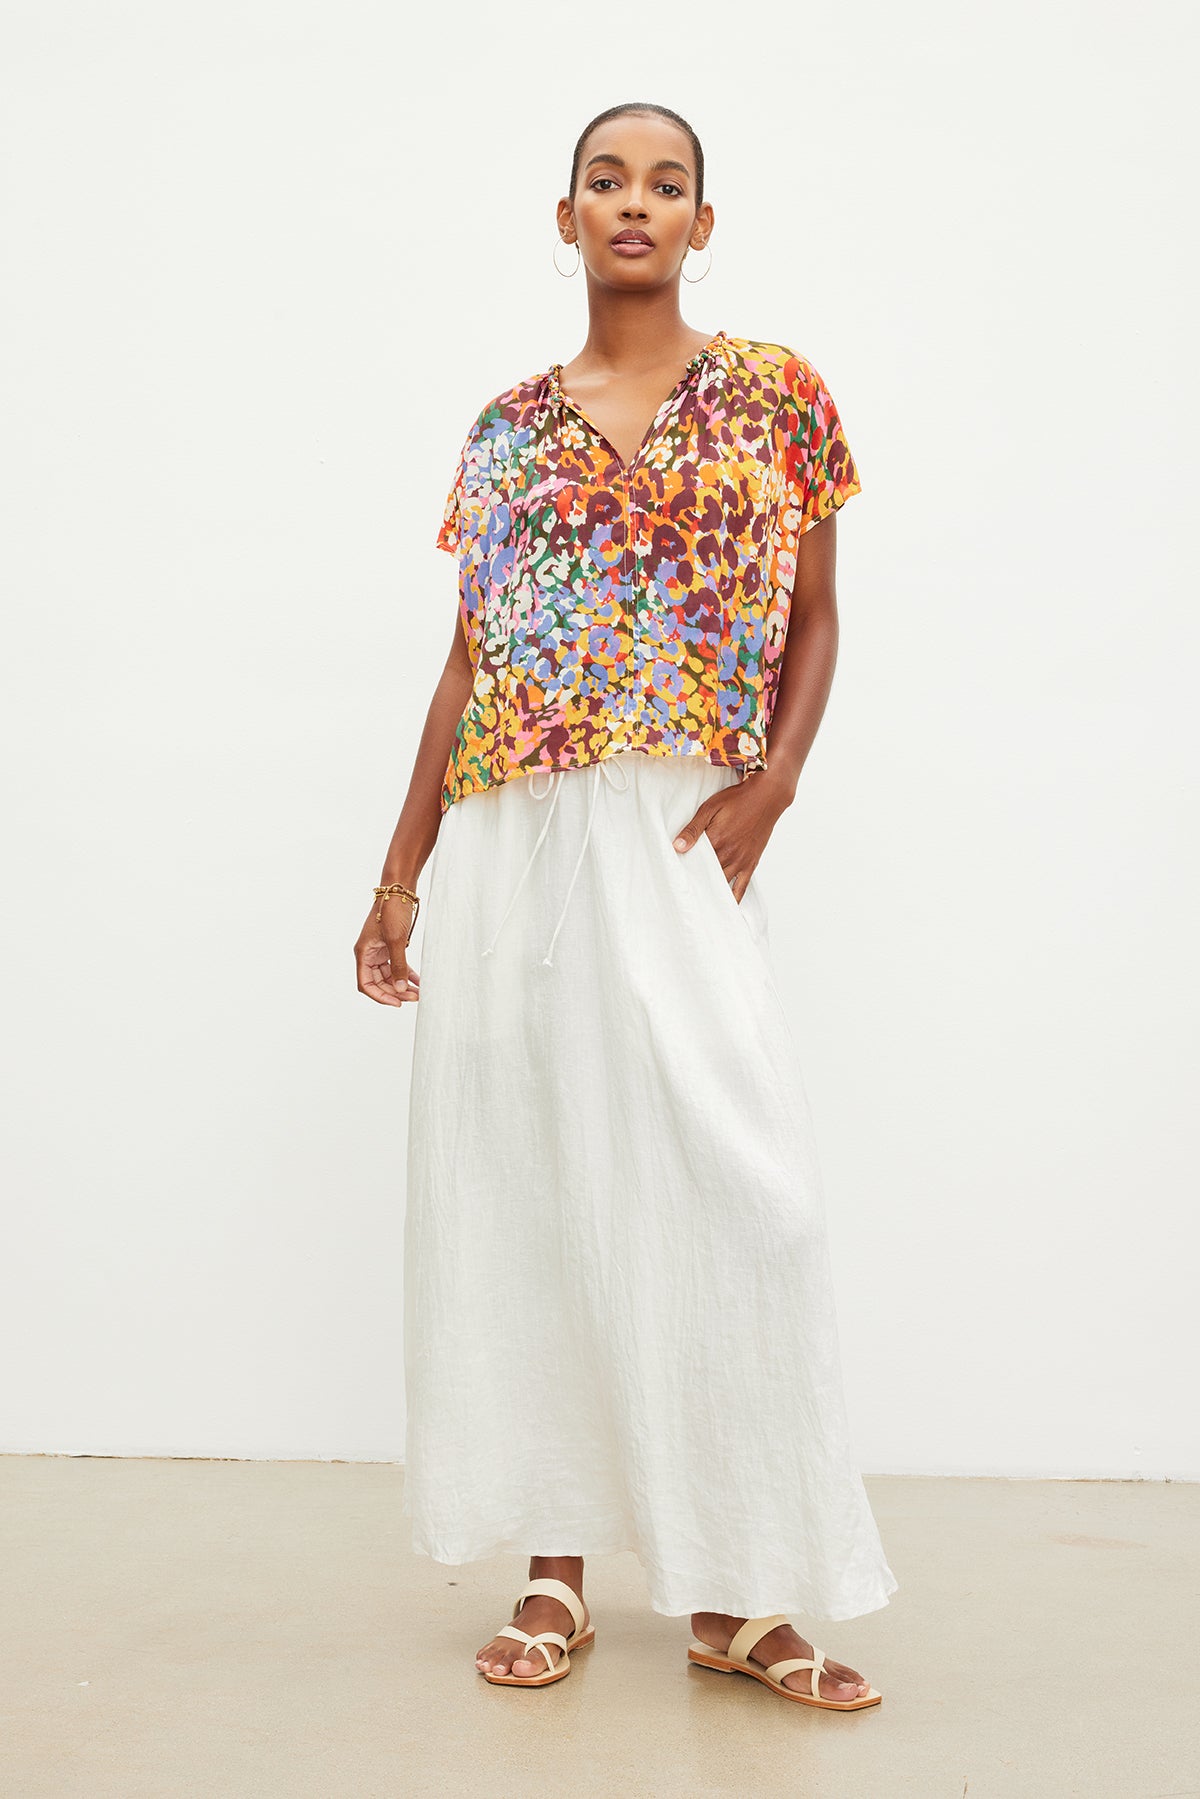 The model is wearing a Velvet by Graham & Spencer TRIXY PRINTED COCOON TOP and white wide leg pants.-35967708233921